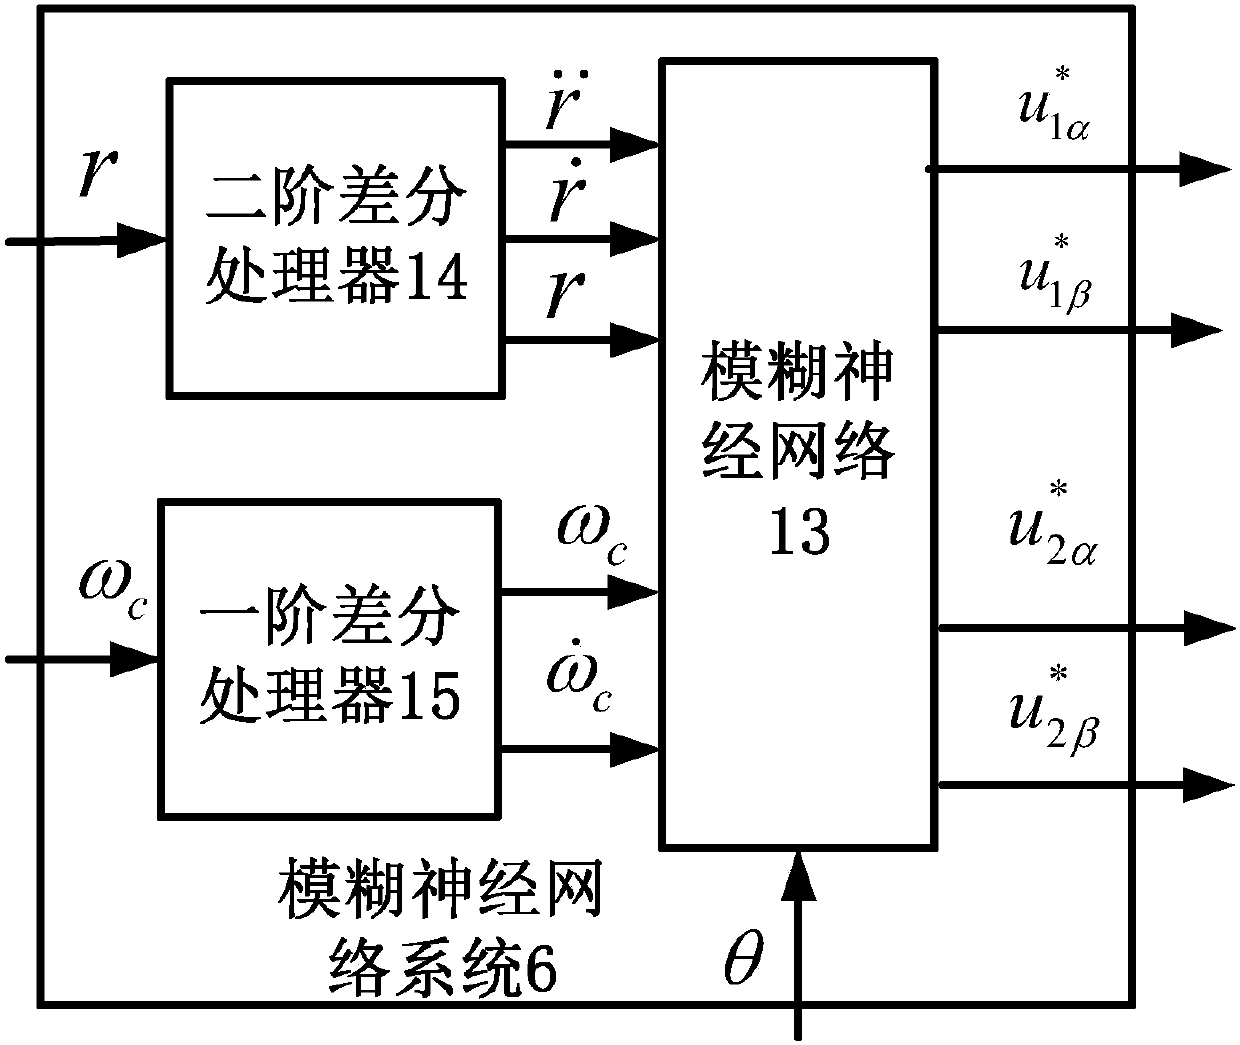 Fuzzy neural network decoupling controller for bearing-free permanent magnet synchronous motor